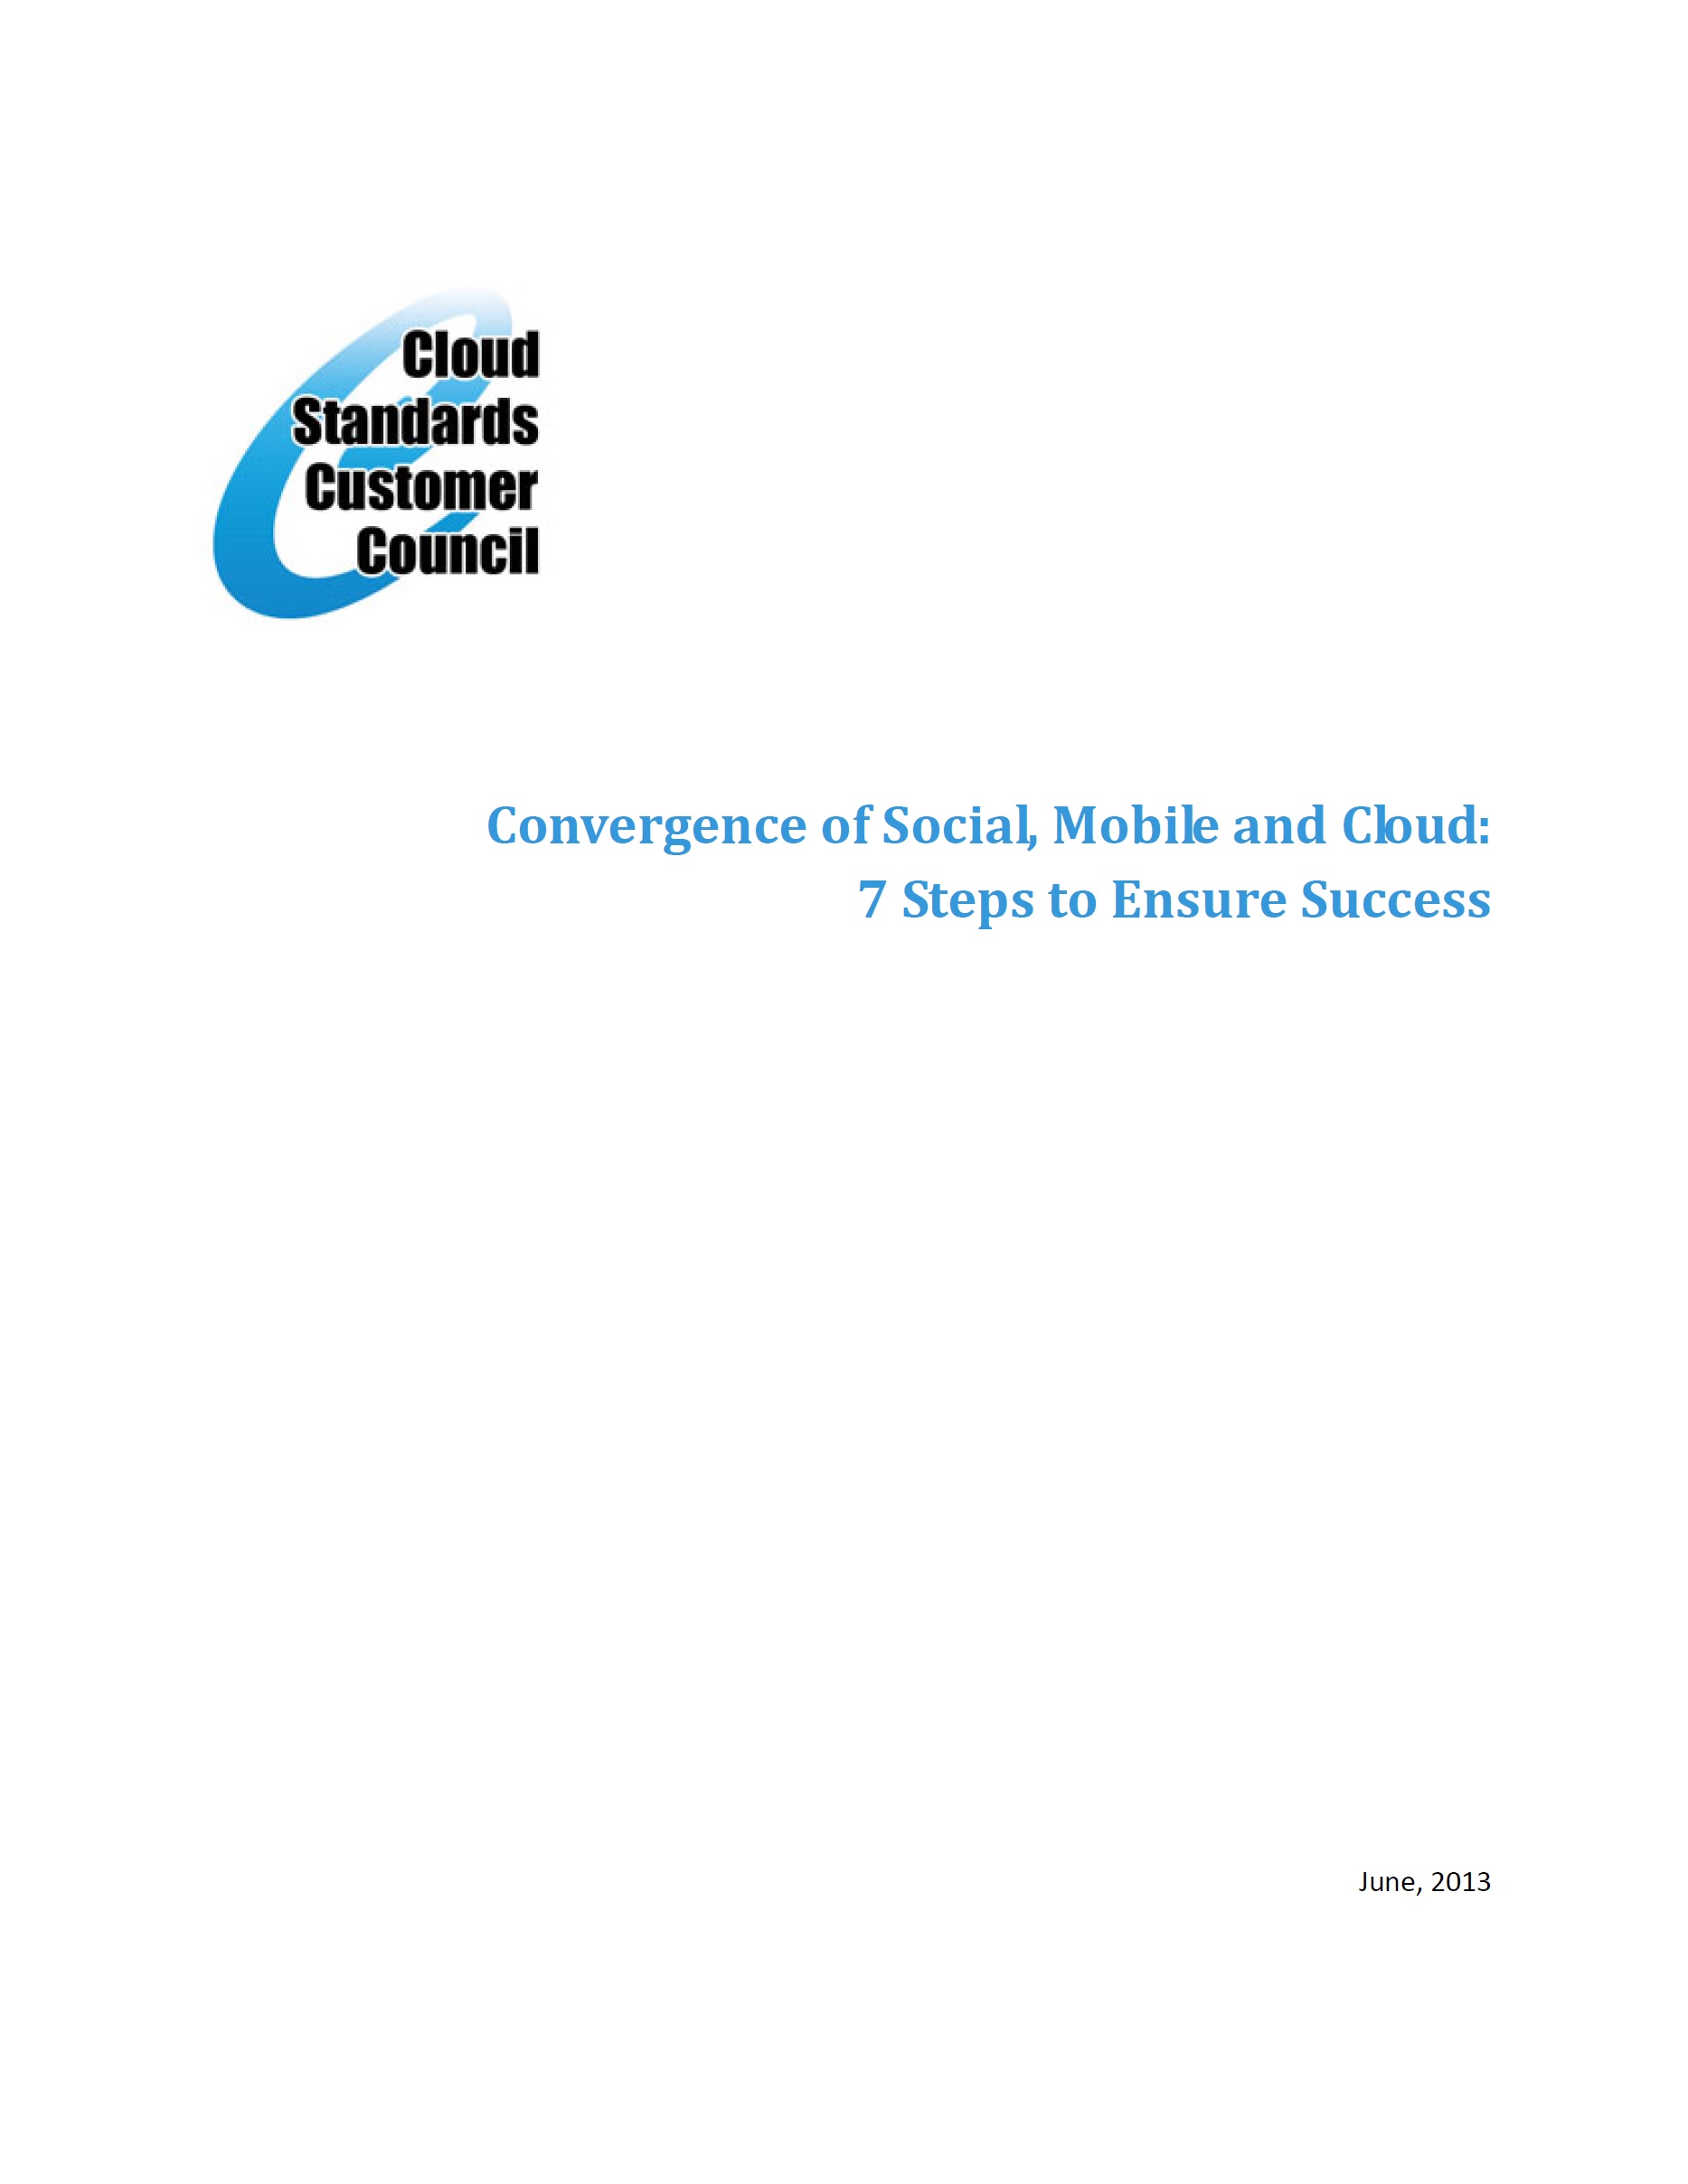 Convergence of Social, Mobile and Cloud: 7 Steps to Ensure Success – CSCC, 2013